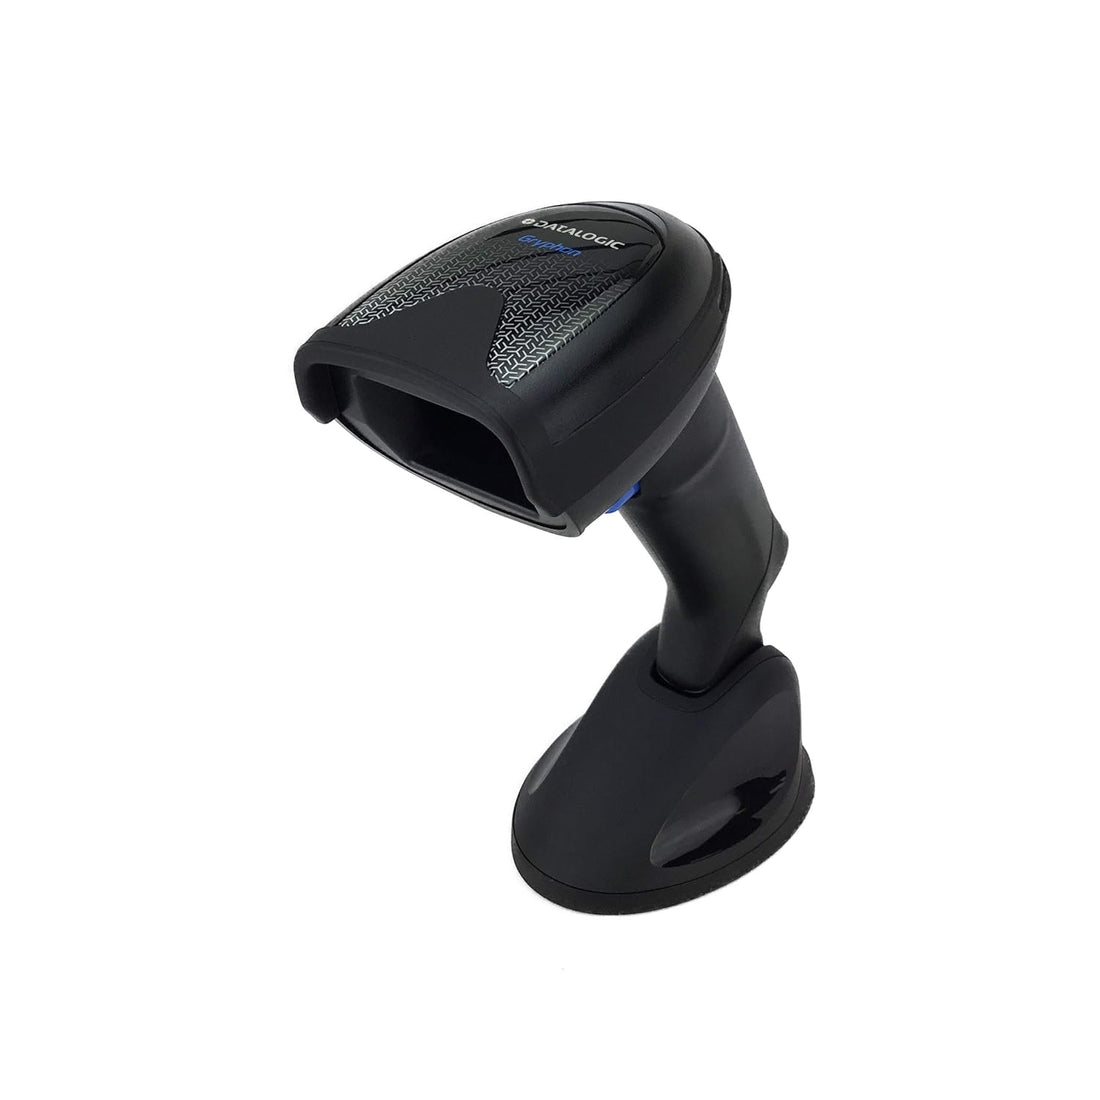 Datalogic Gryphon GD4590-BK-B All-in-One 2D Omnidirectional Reading Barcode Scanner (Permanent Tilting Stand for Handheld or Presentation Mode, Motion Sensing Technology) with USB Cable